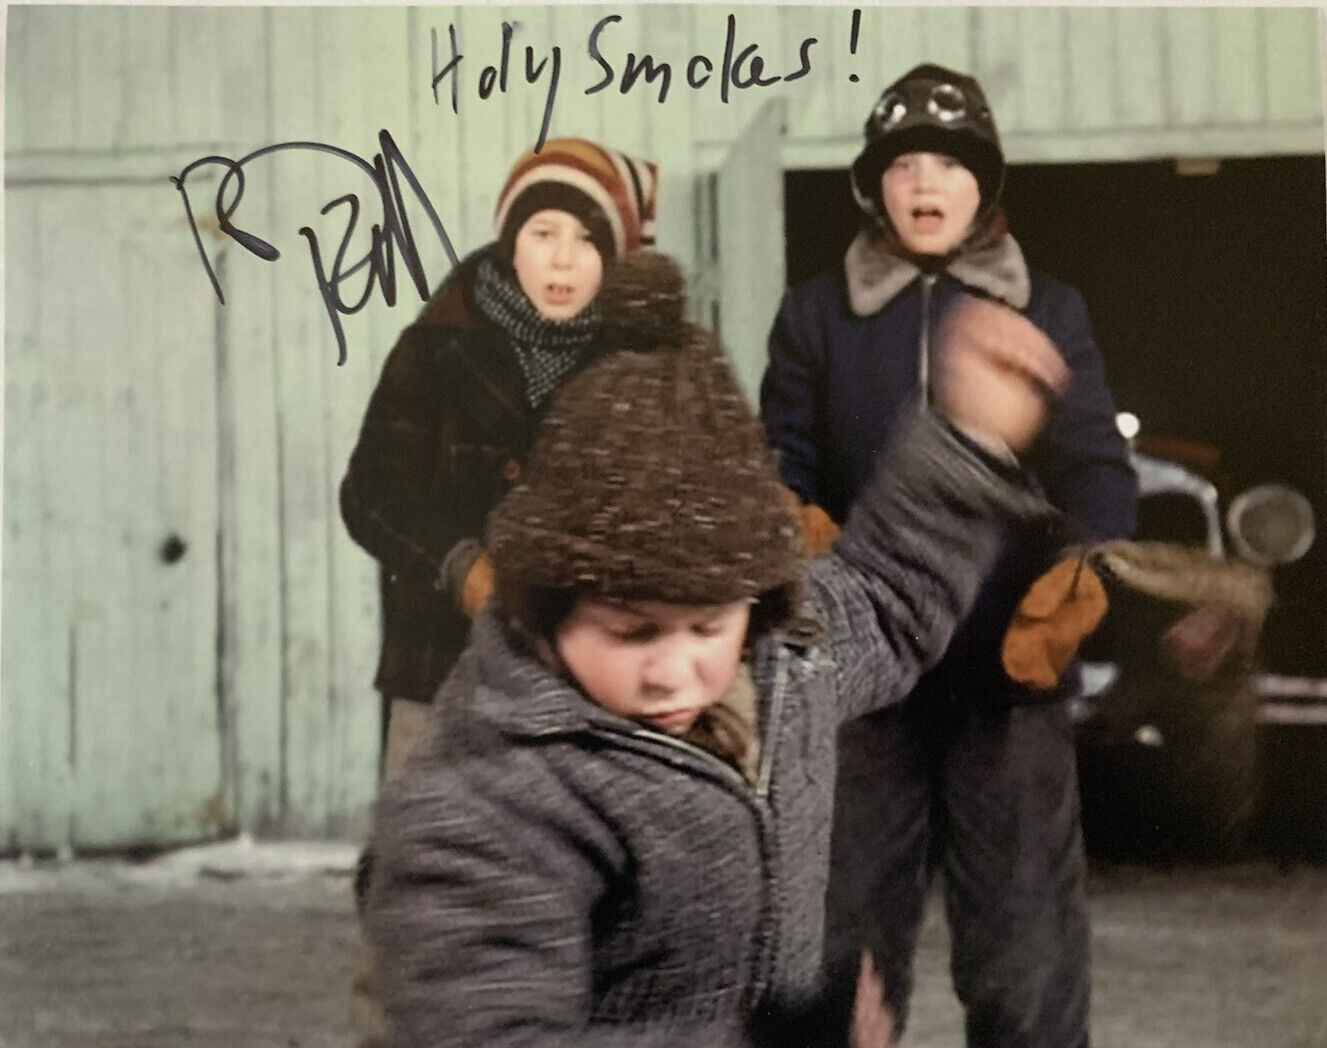 RD ROBB HAND SIGNED 8x10 Photo Poster painting A CHRISTMAS STORY MOVIE AUTHENTIC AUTOGRAPH COA